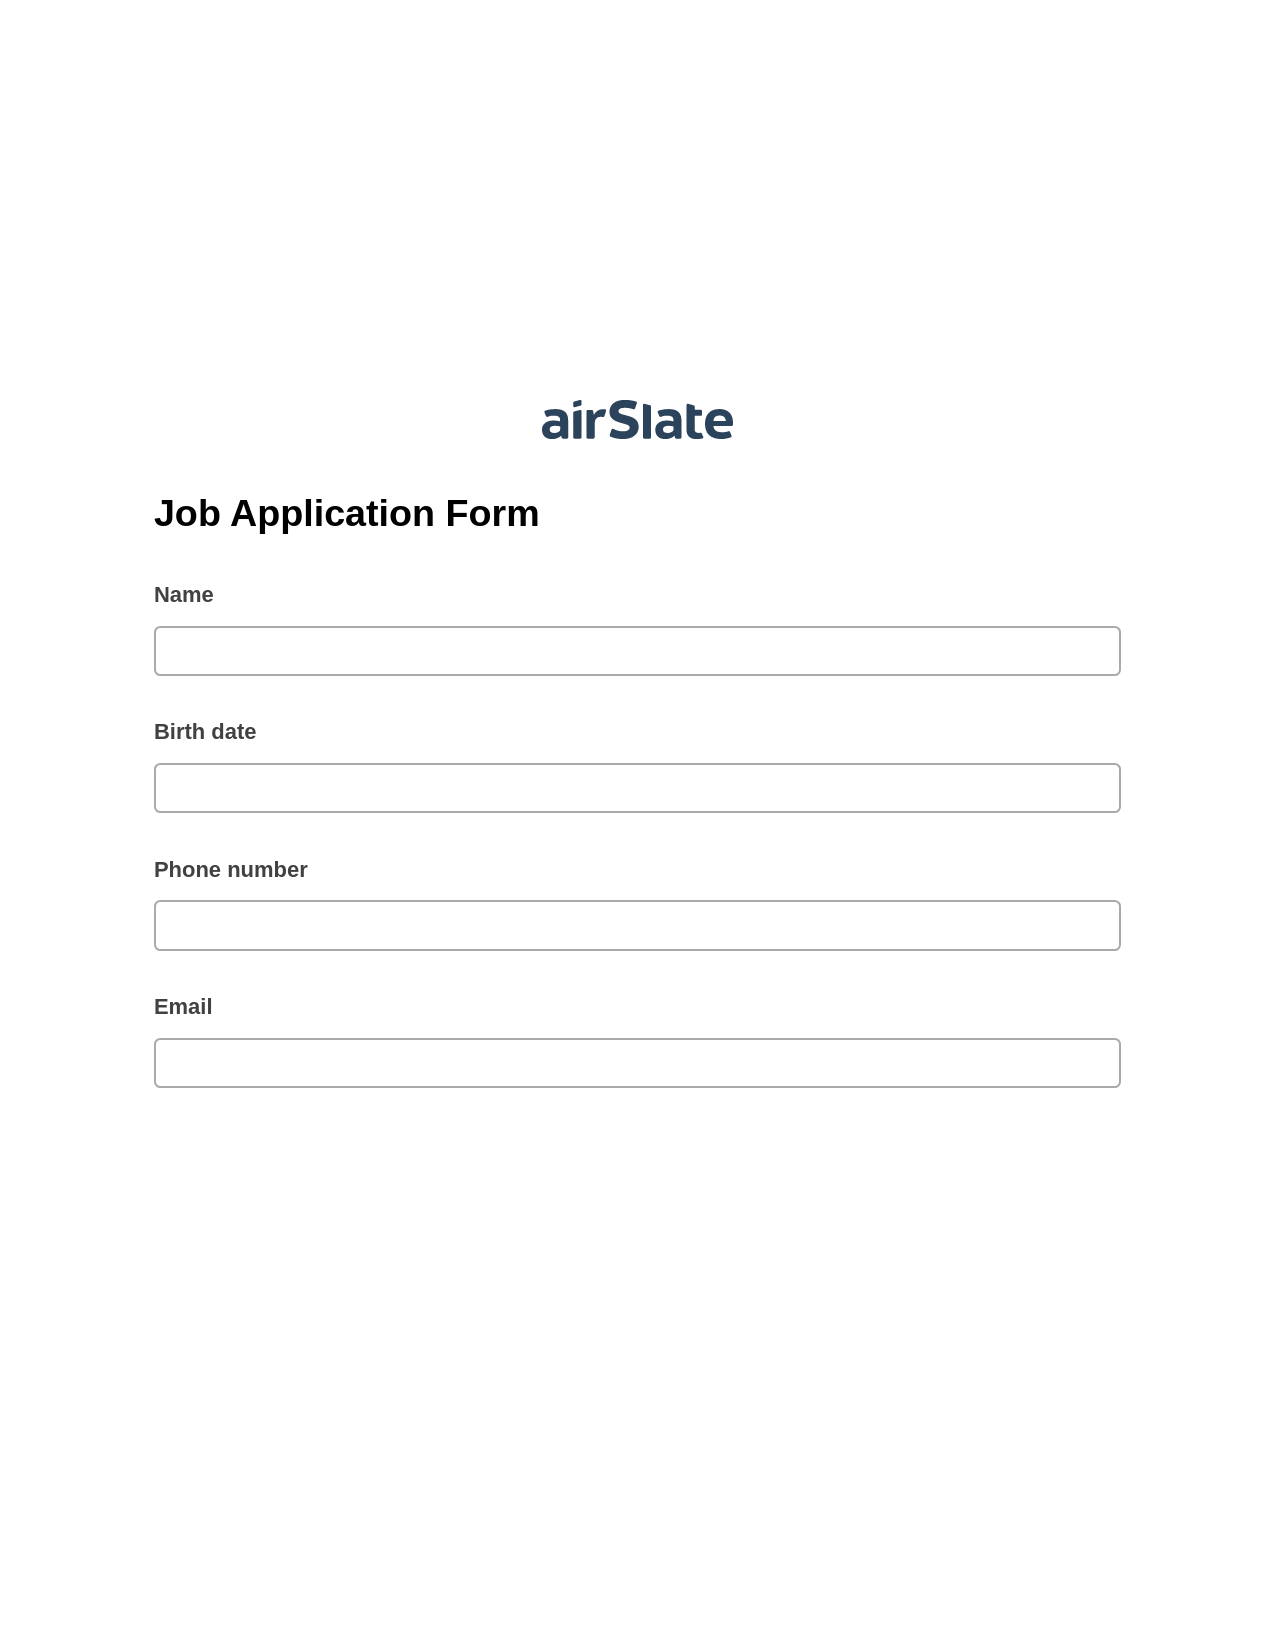 Multirole Job Application Form Pre-fill from another Slate Bot, Assign Slate Name Bot, Archive to SharePoint Folder Bot